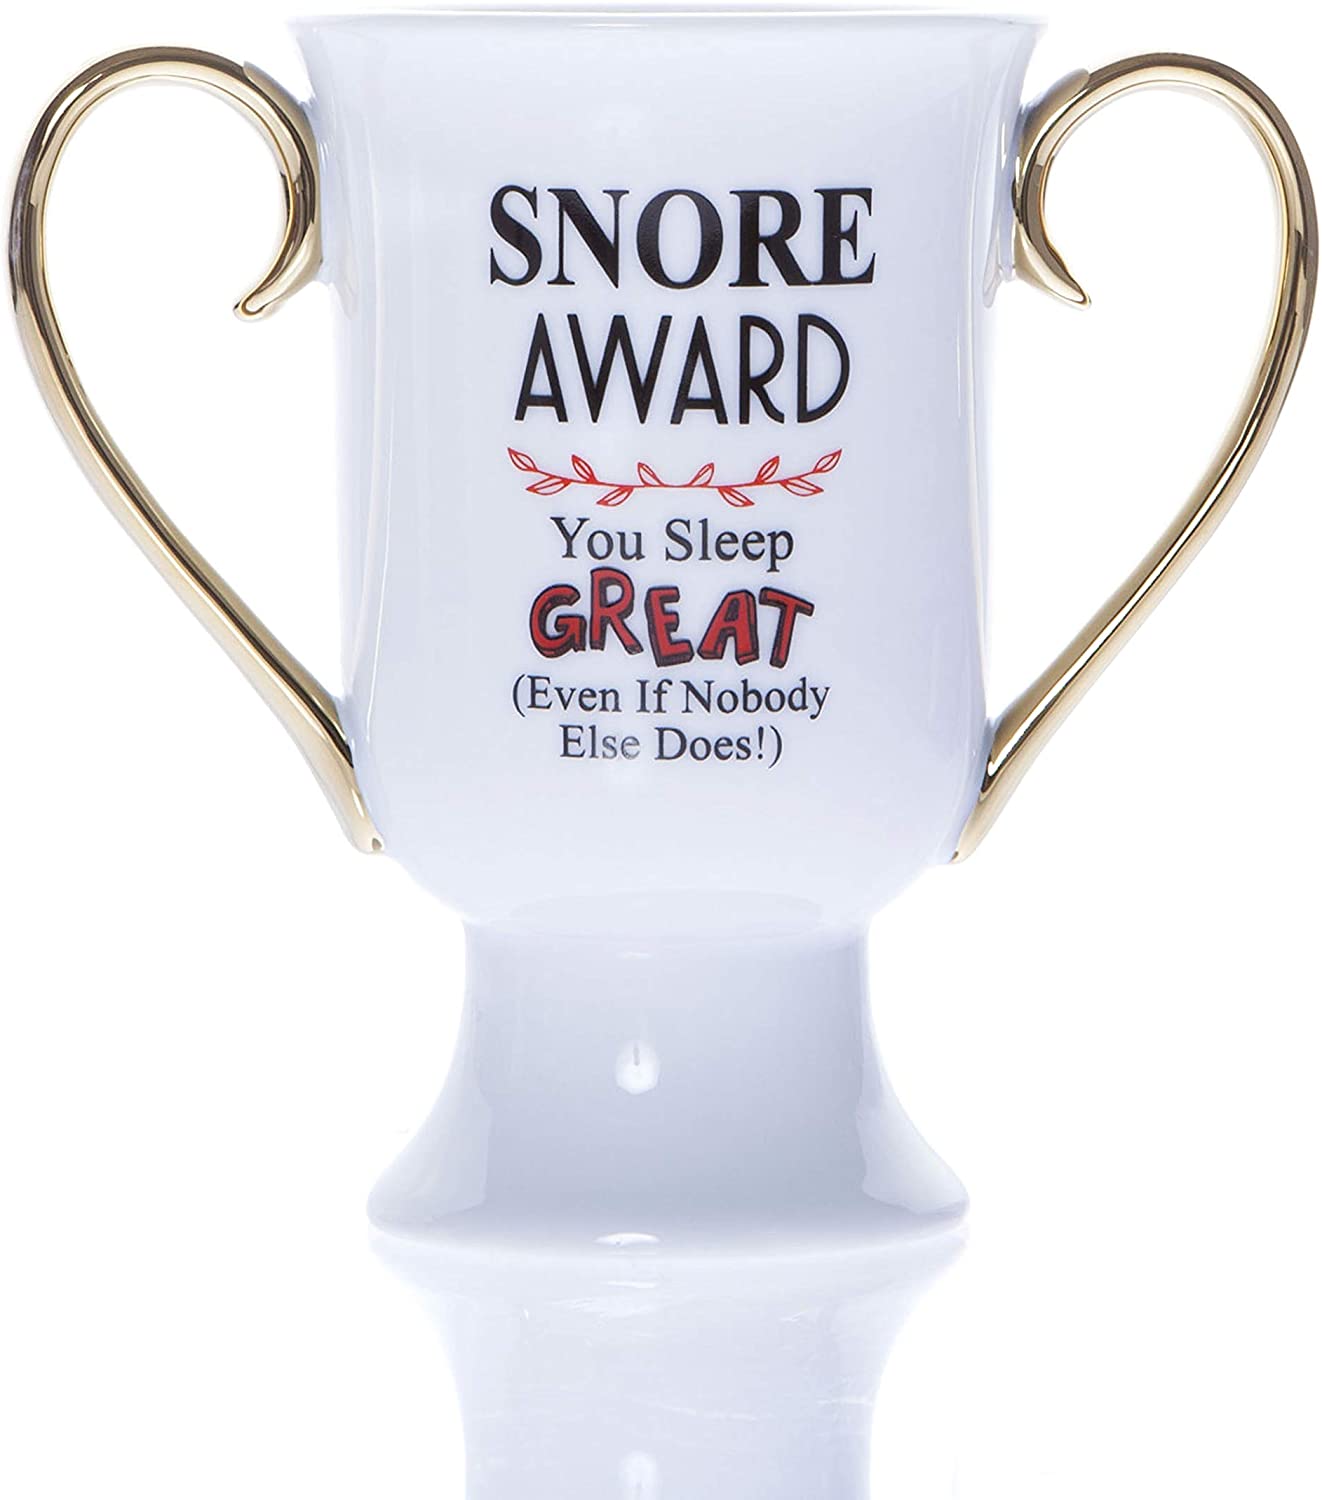 nore Award Gift for Him